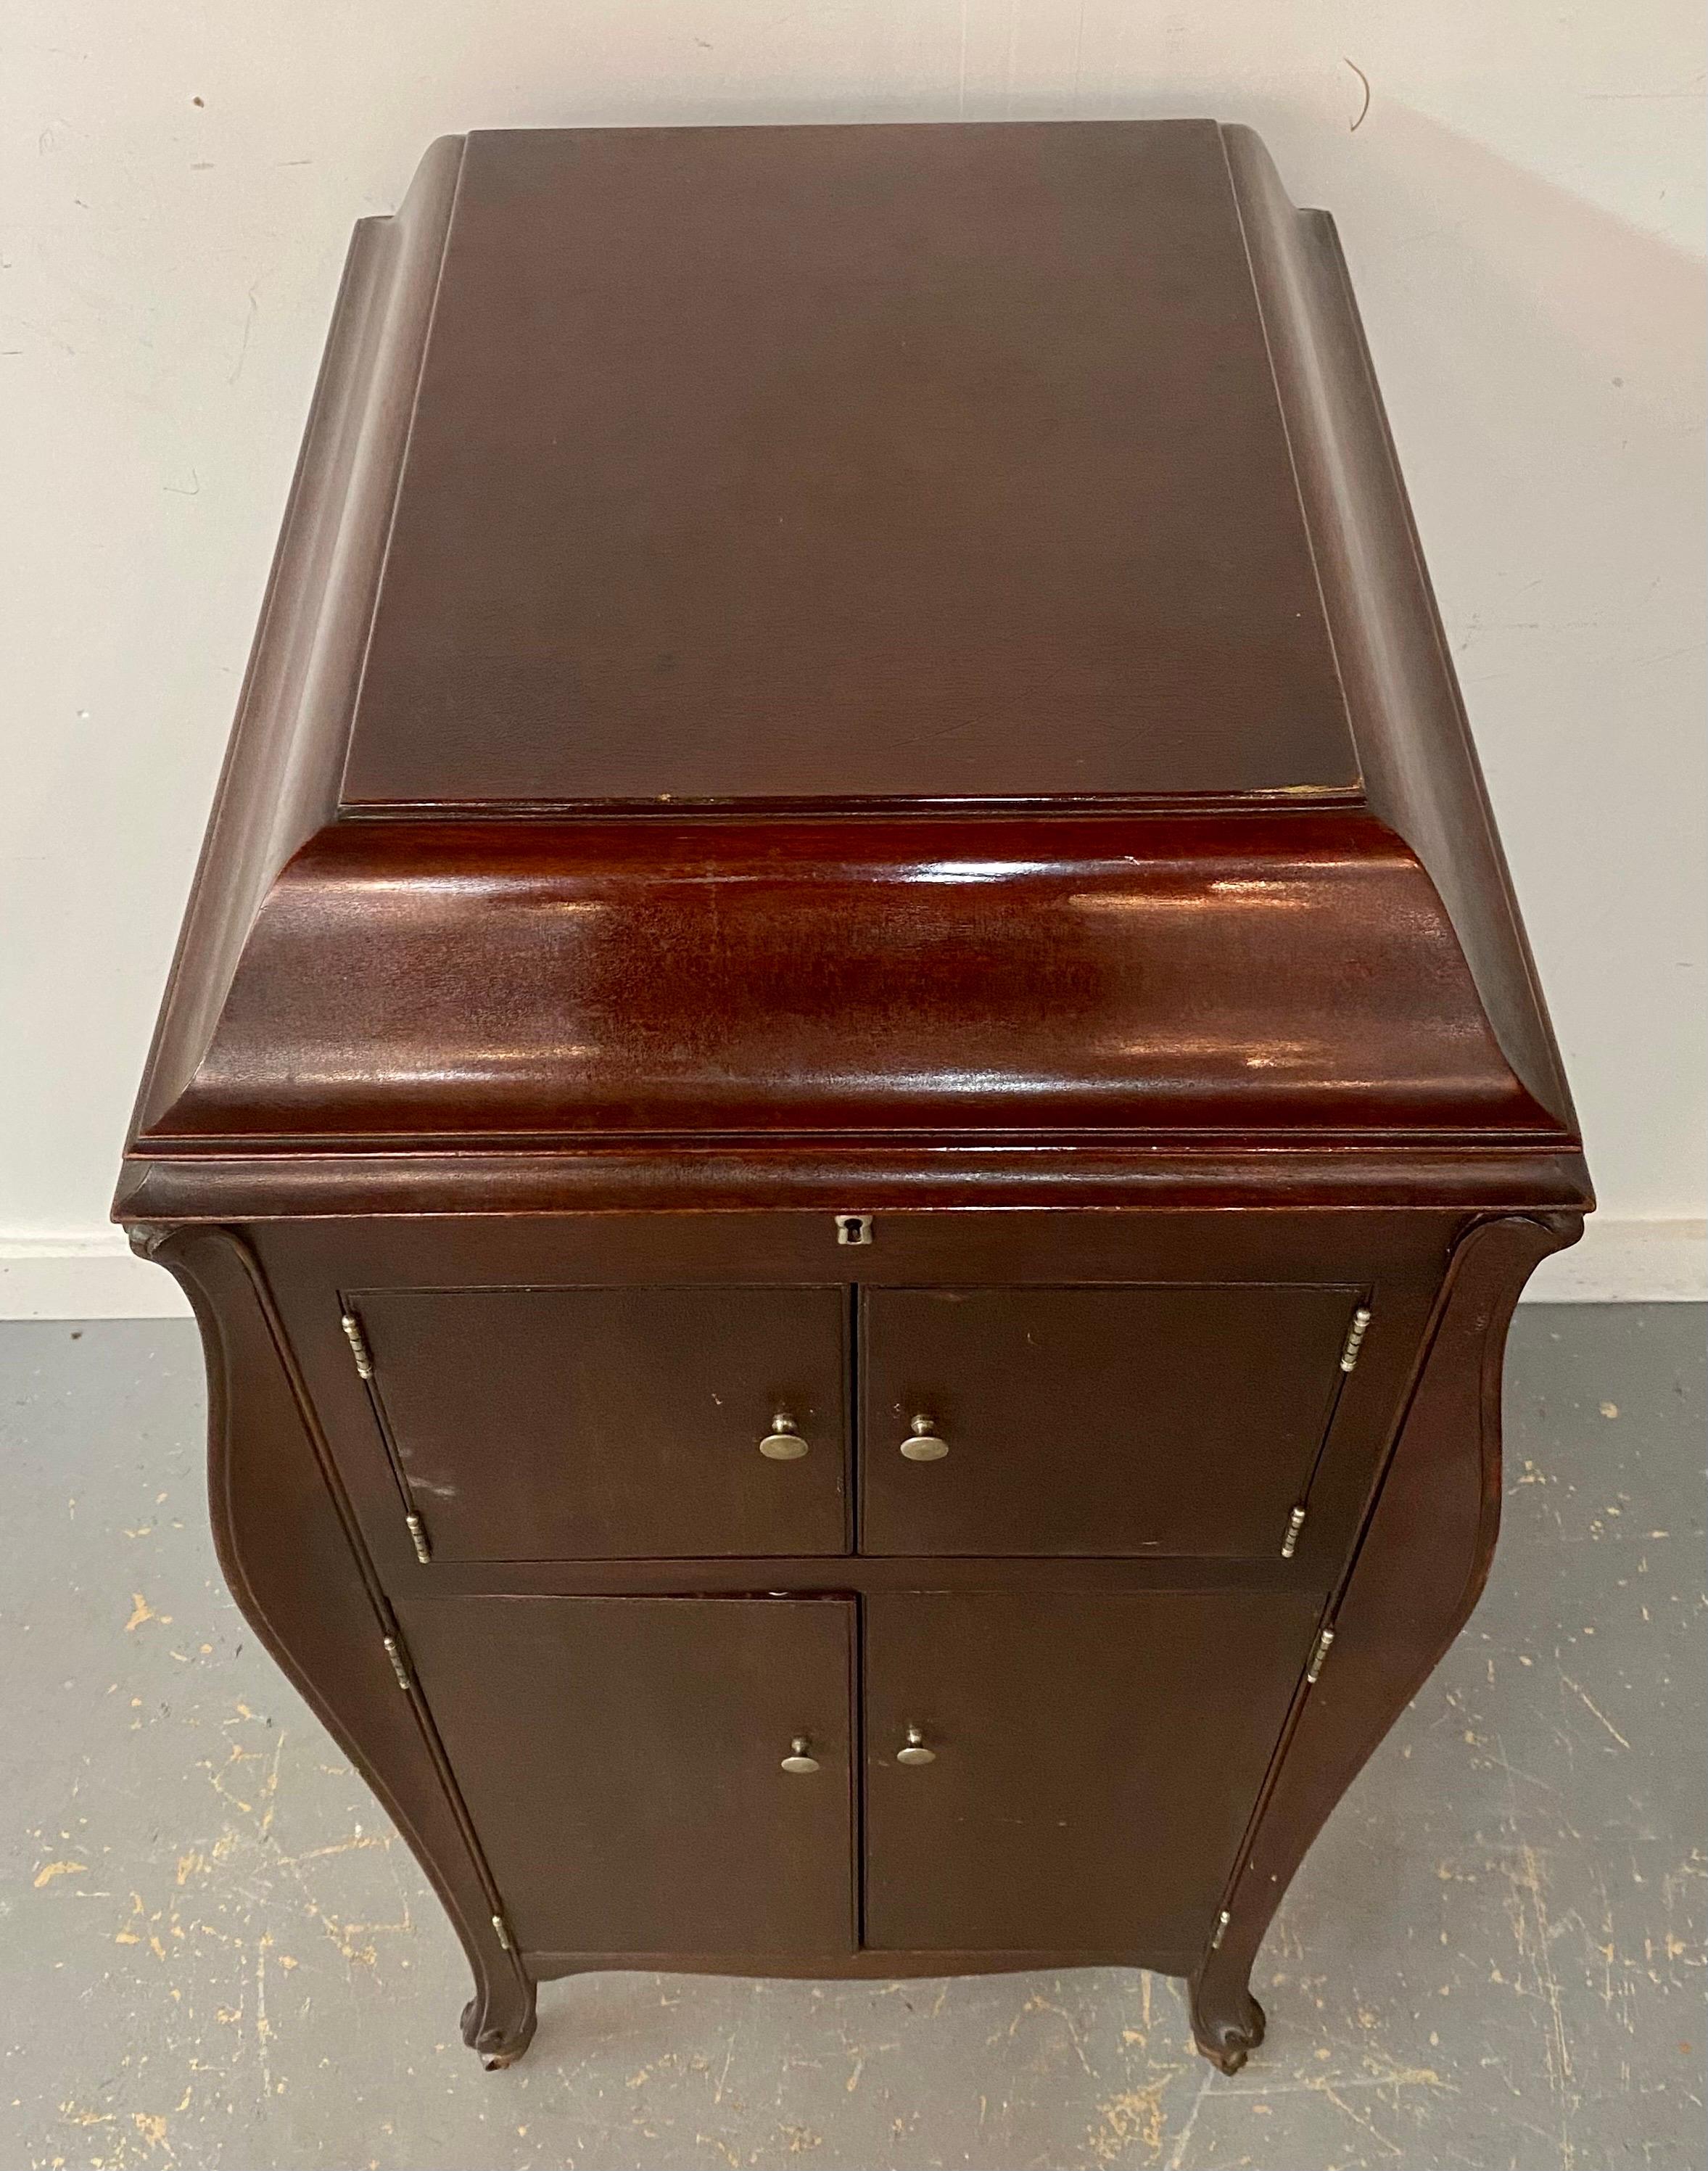 Early 20th Century Antique VictorLA Model VV-XI Phonograph in Queen Anne Style Mahogany Cabinet  For Sale